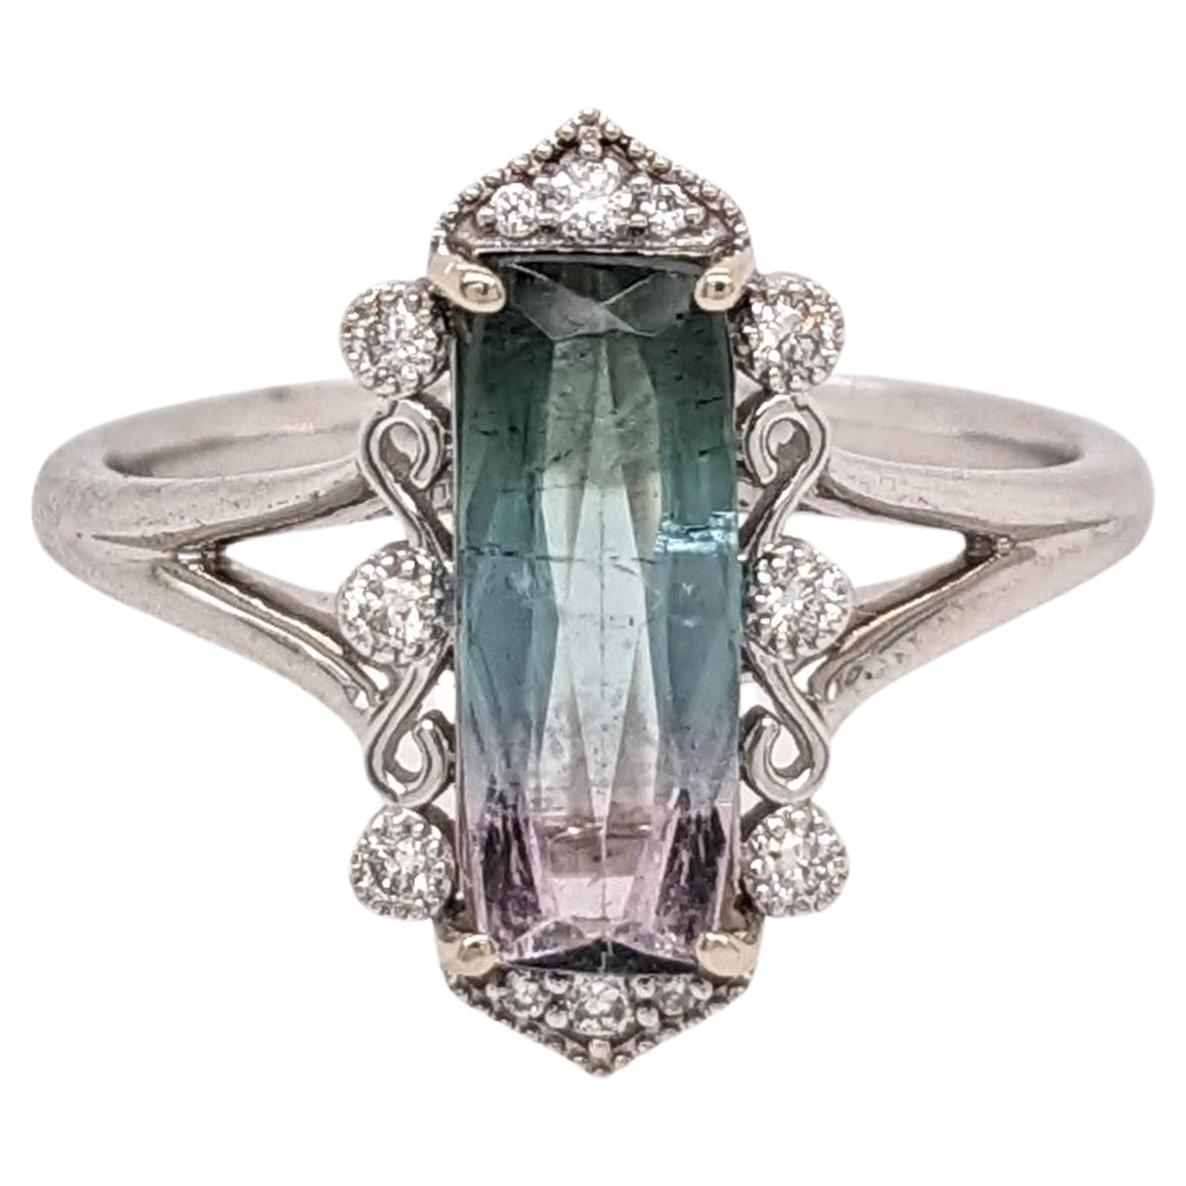 This statement ring features an absolutely gorgeous teal to pink bi-color tourmaline!! What a unique and stunning natural gemstone color combination! Made in 14k white gold with natural earth mined diamond accents and milgrain detail giving a